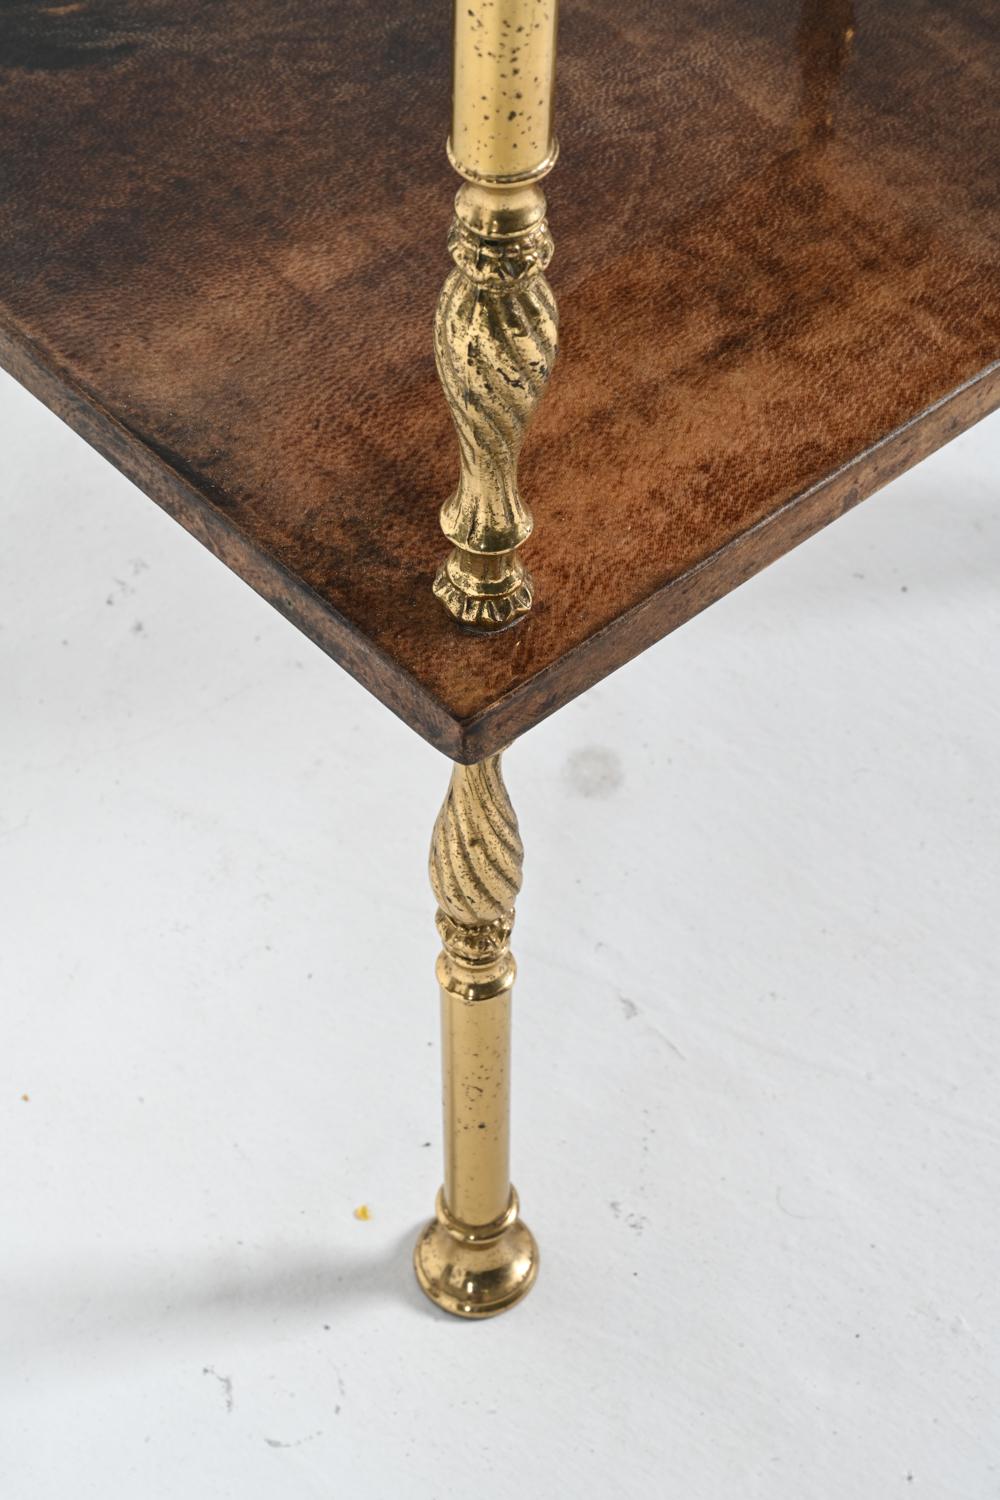 Aldo Tura Lacquered Goatskin & Brass Occasional Table, c. 1960's For Sale 3